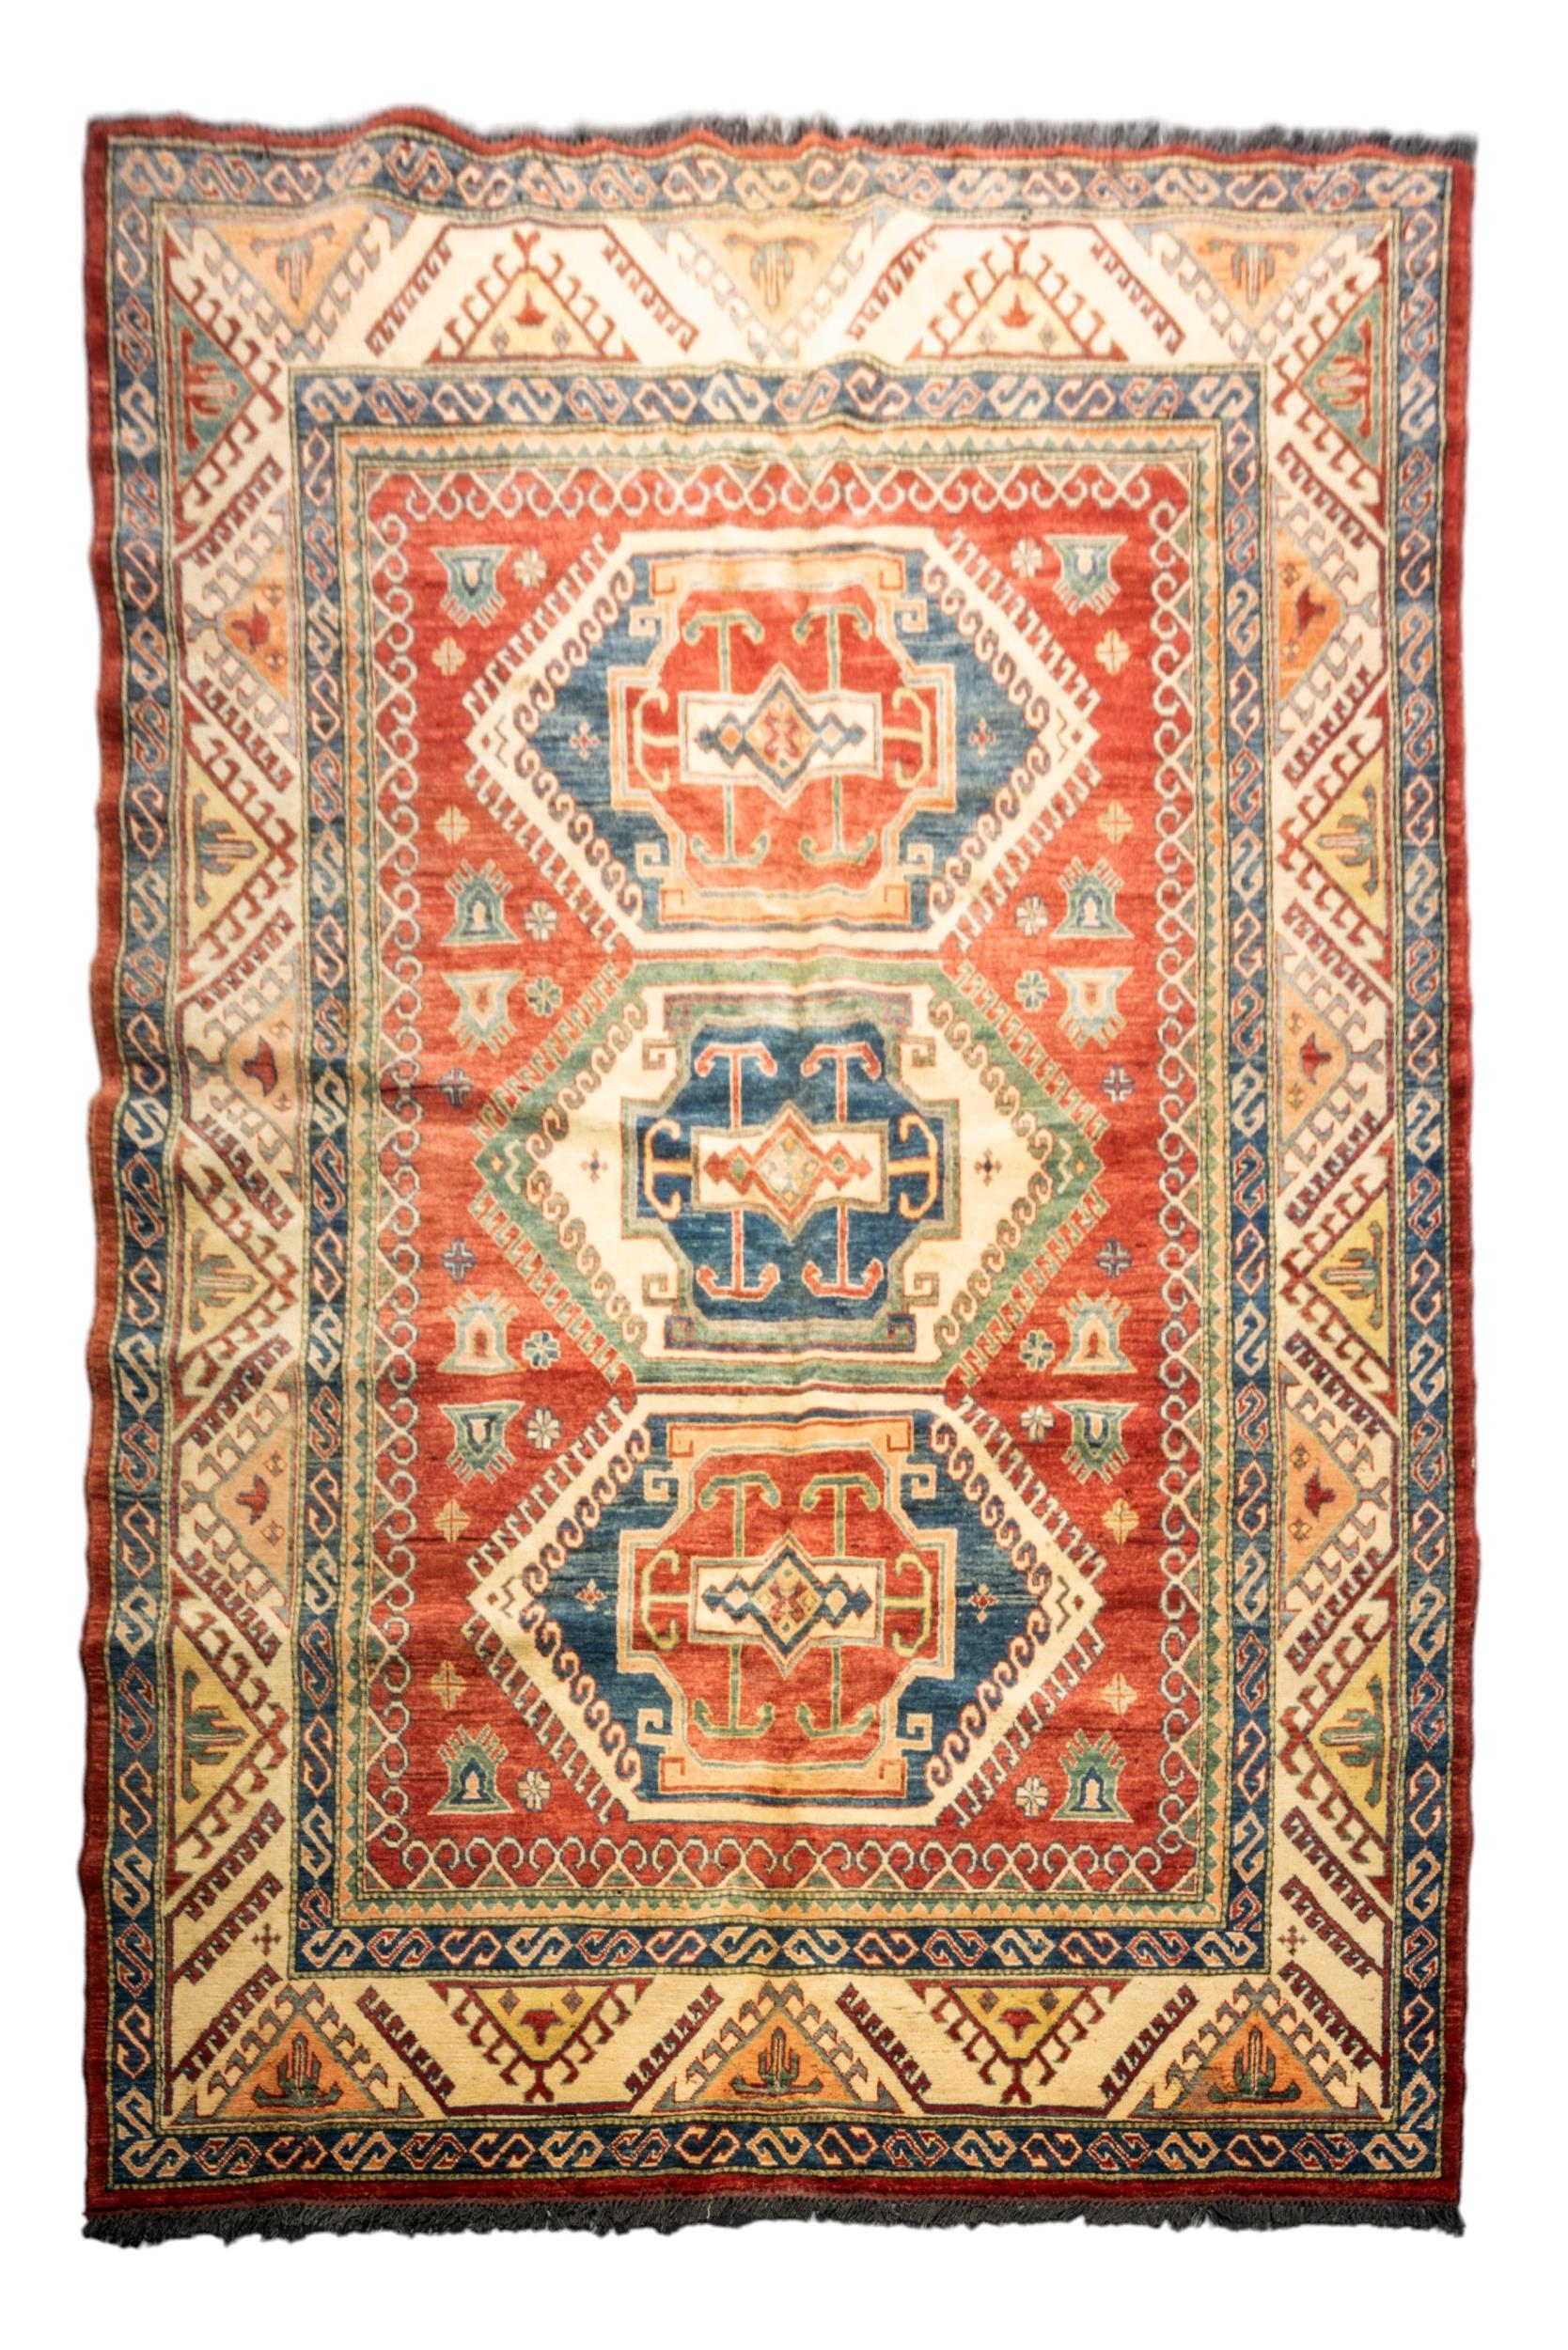 A HAND KNOTTED PERSIAN RUG, MID-LATE 20TH CENTURY, probably Kazhak, small area of damage 332 x 200 - Image 2 of 6